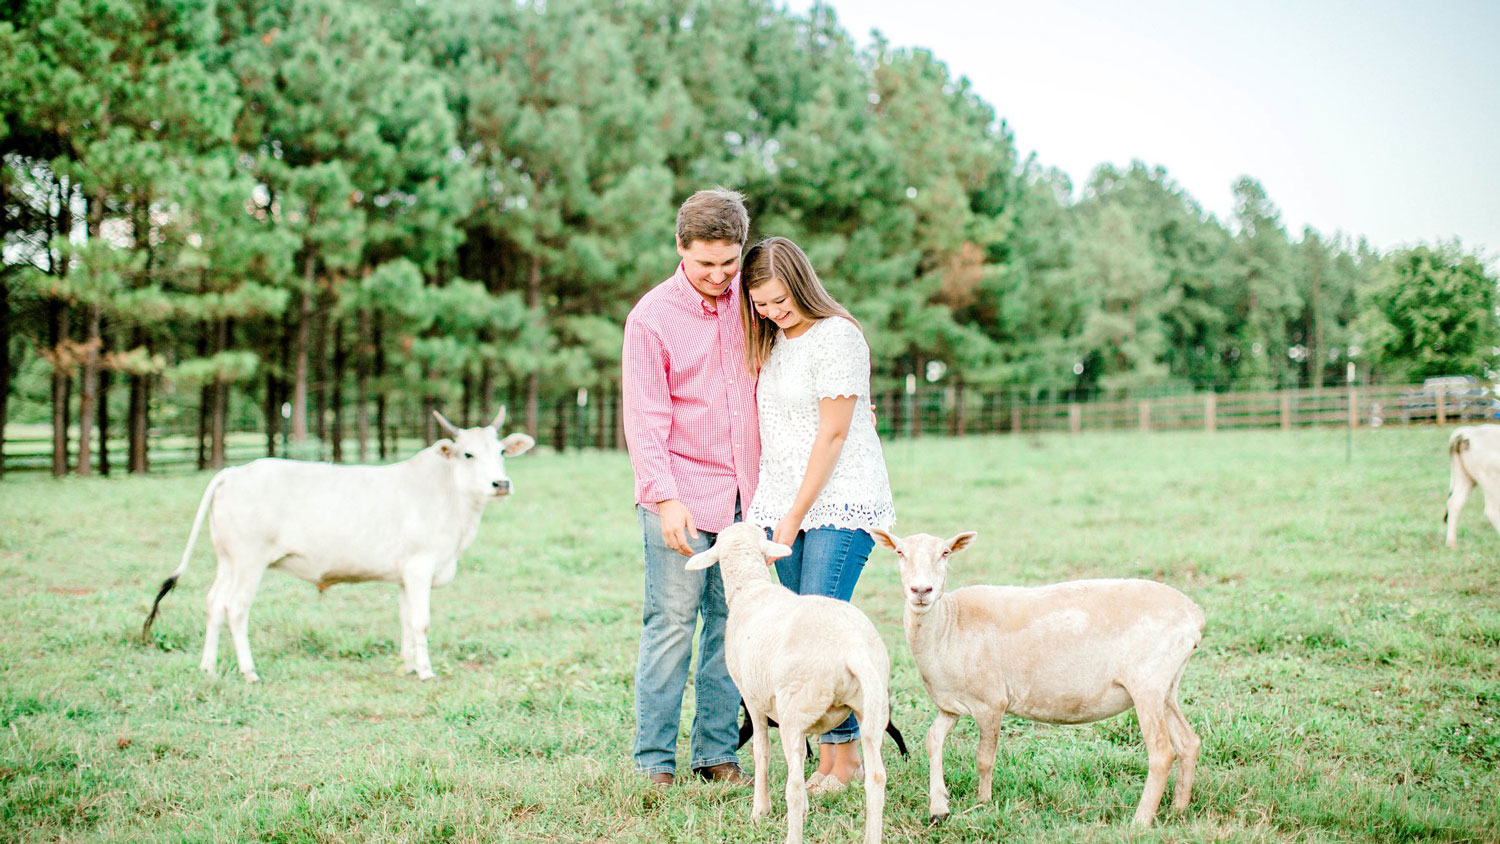 A young couple on a farm with a miniature cow and sheep.